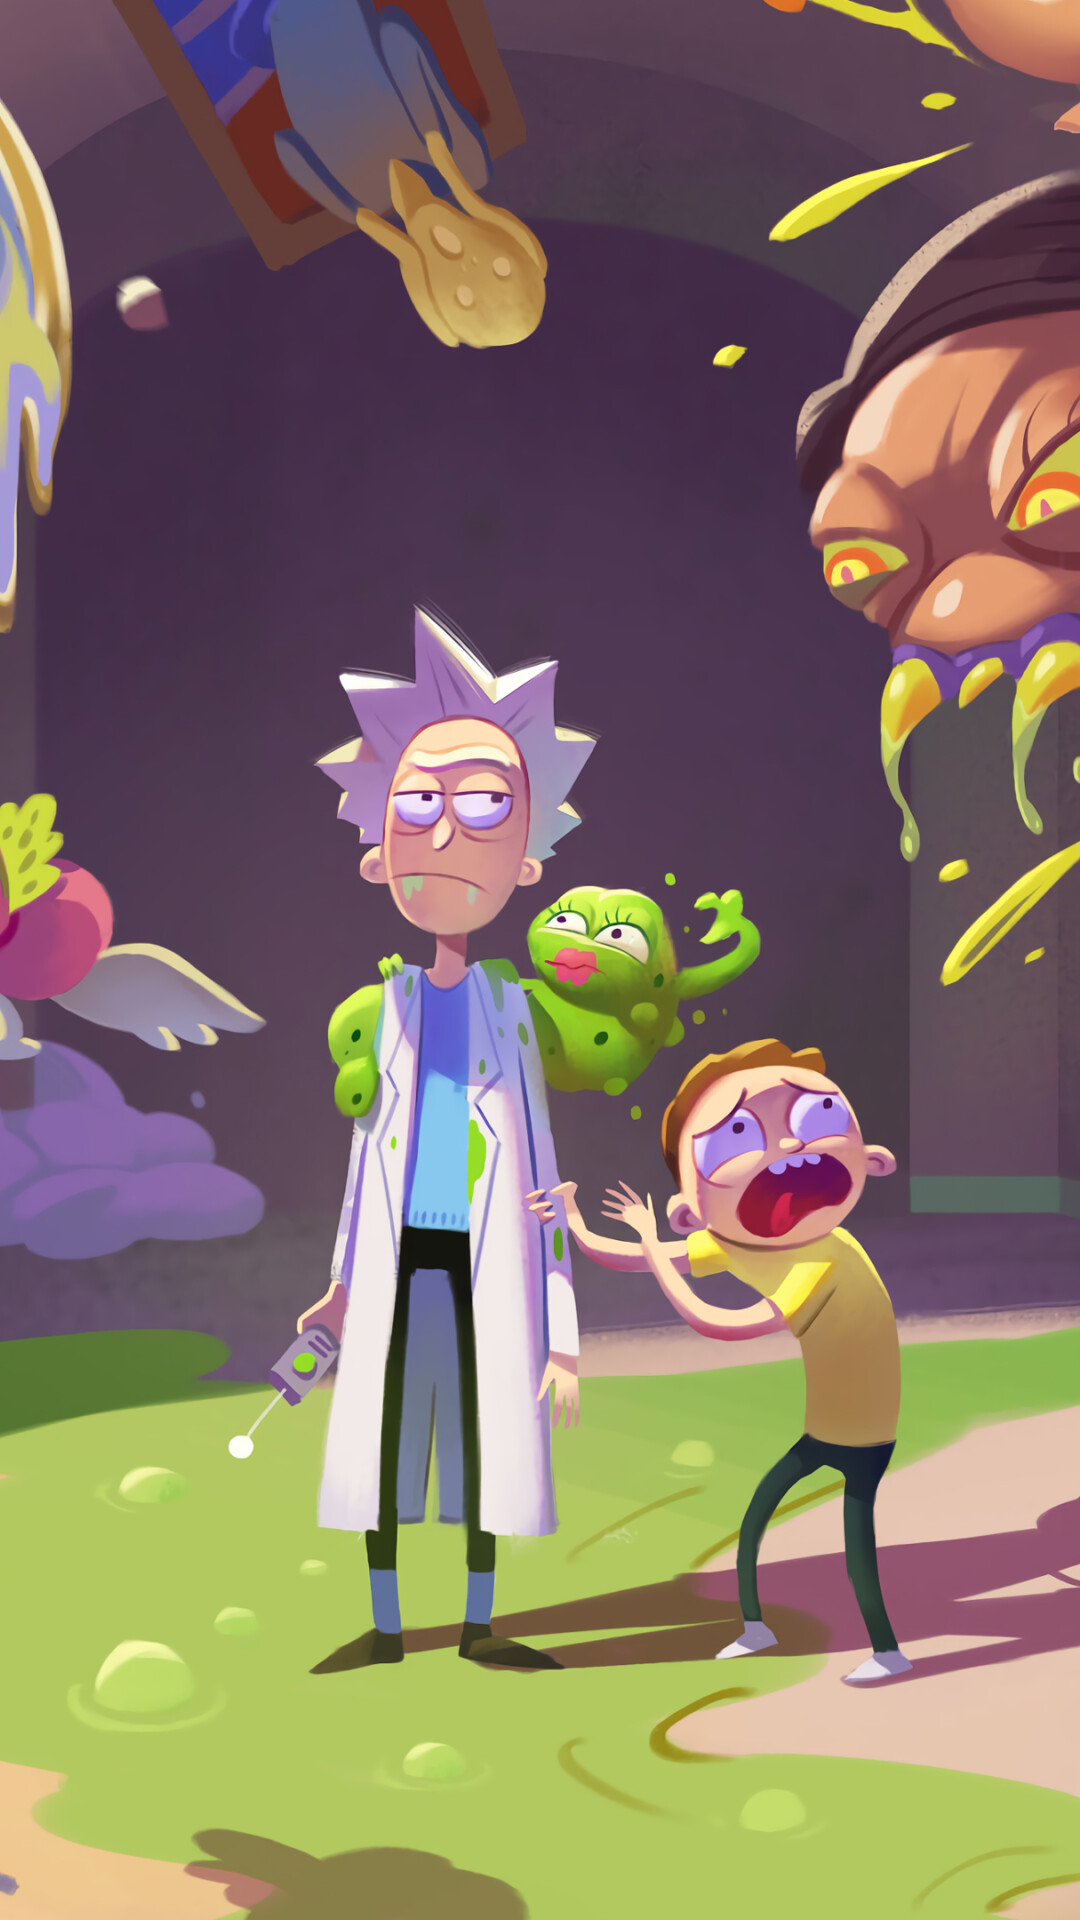 Rick and Morty: The adventures of a scientist and alcoholic, and his grandson. 1080x1920 Full HD Background.